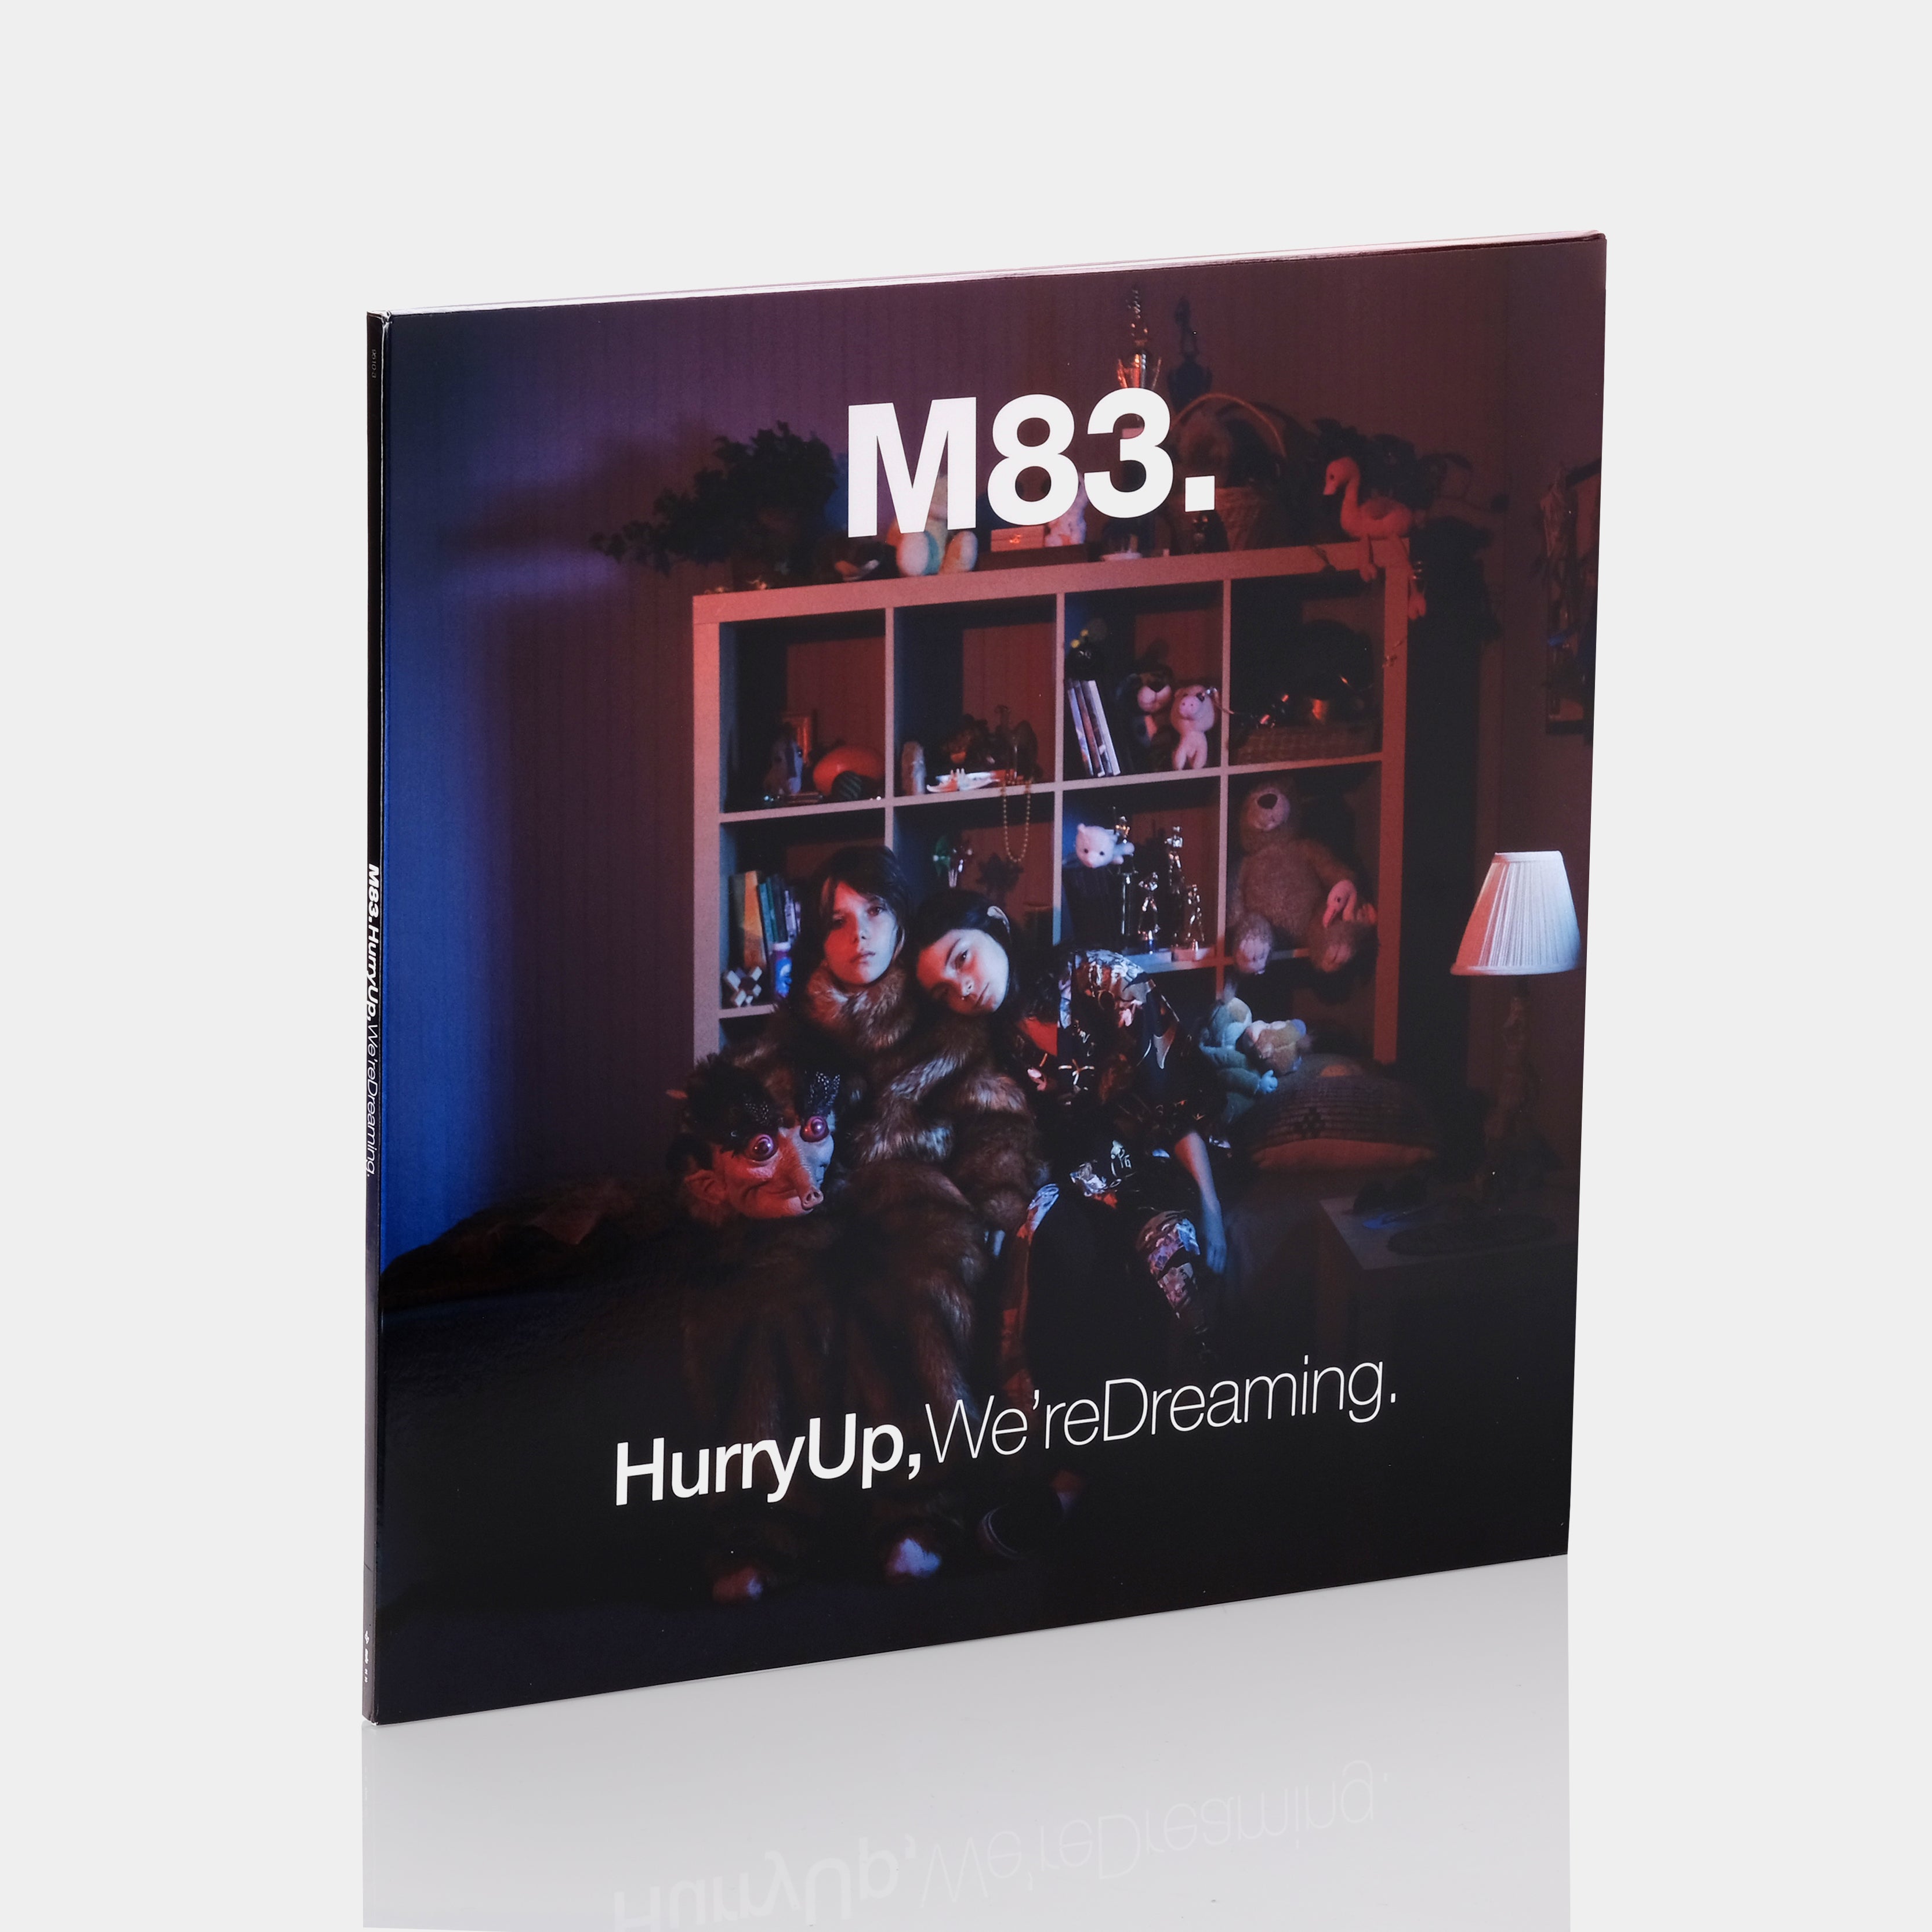 M83 - Hurry Up, We're Dreaming. 2xLP Vinyl Record